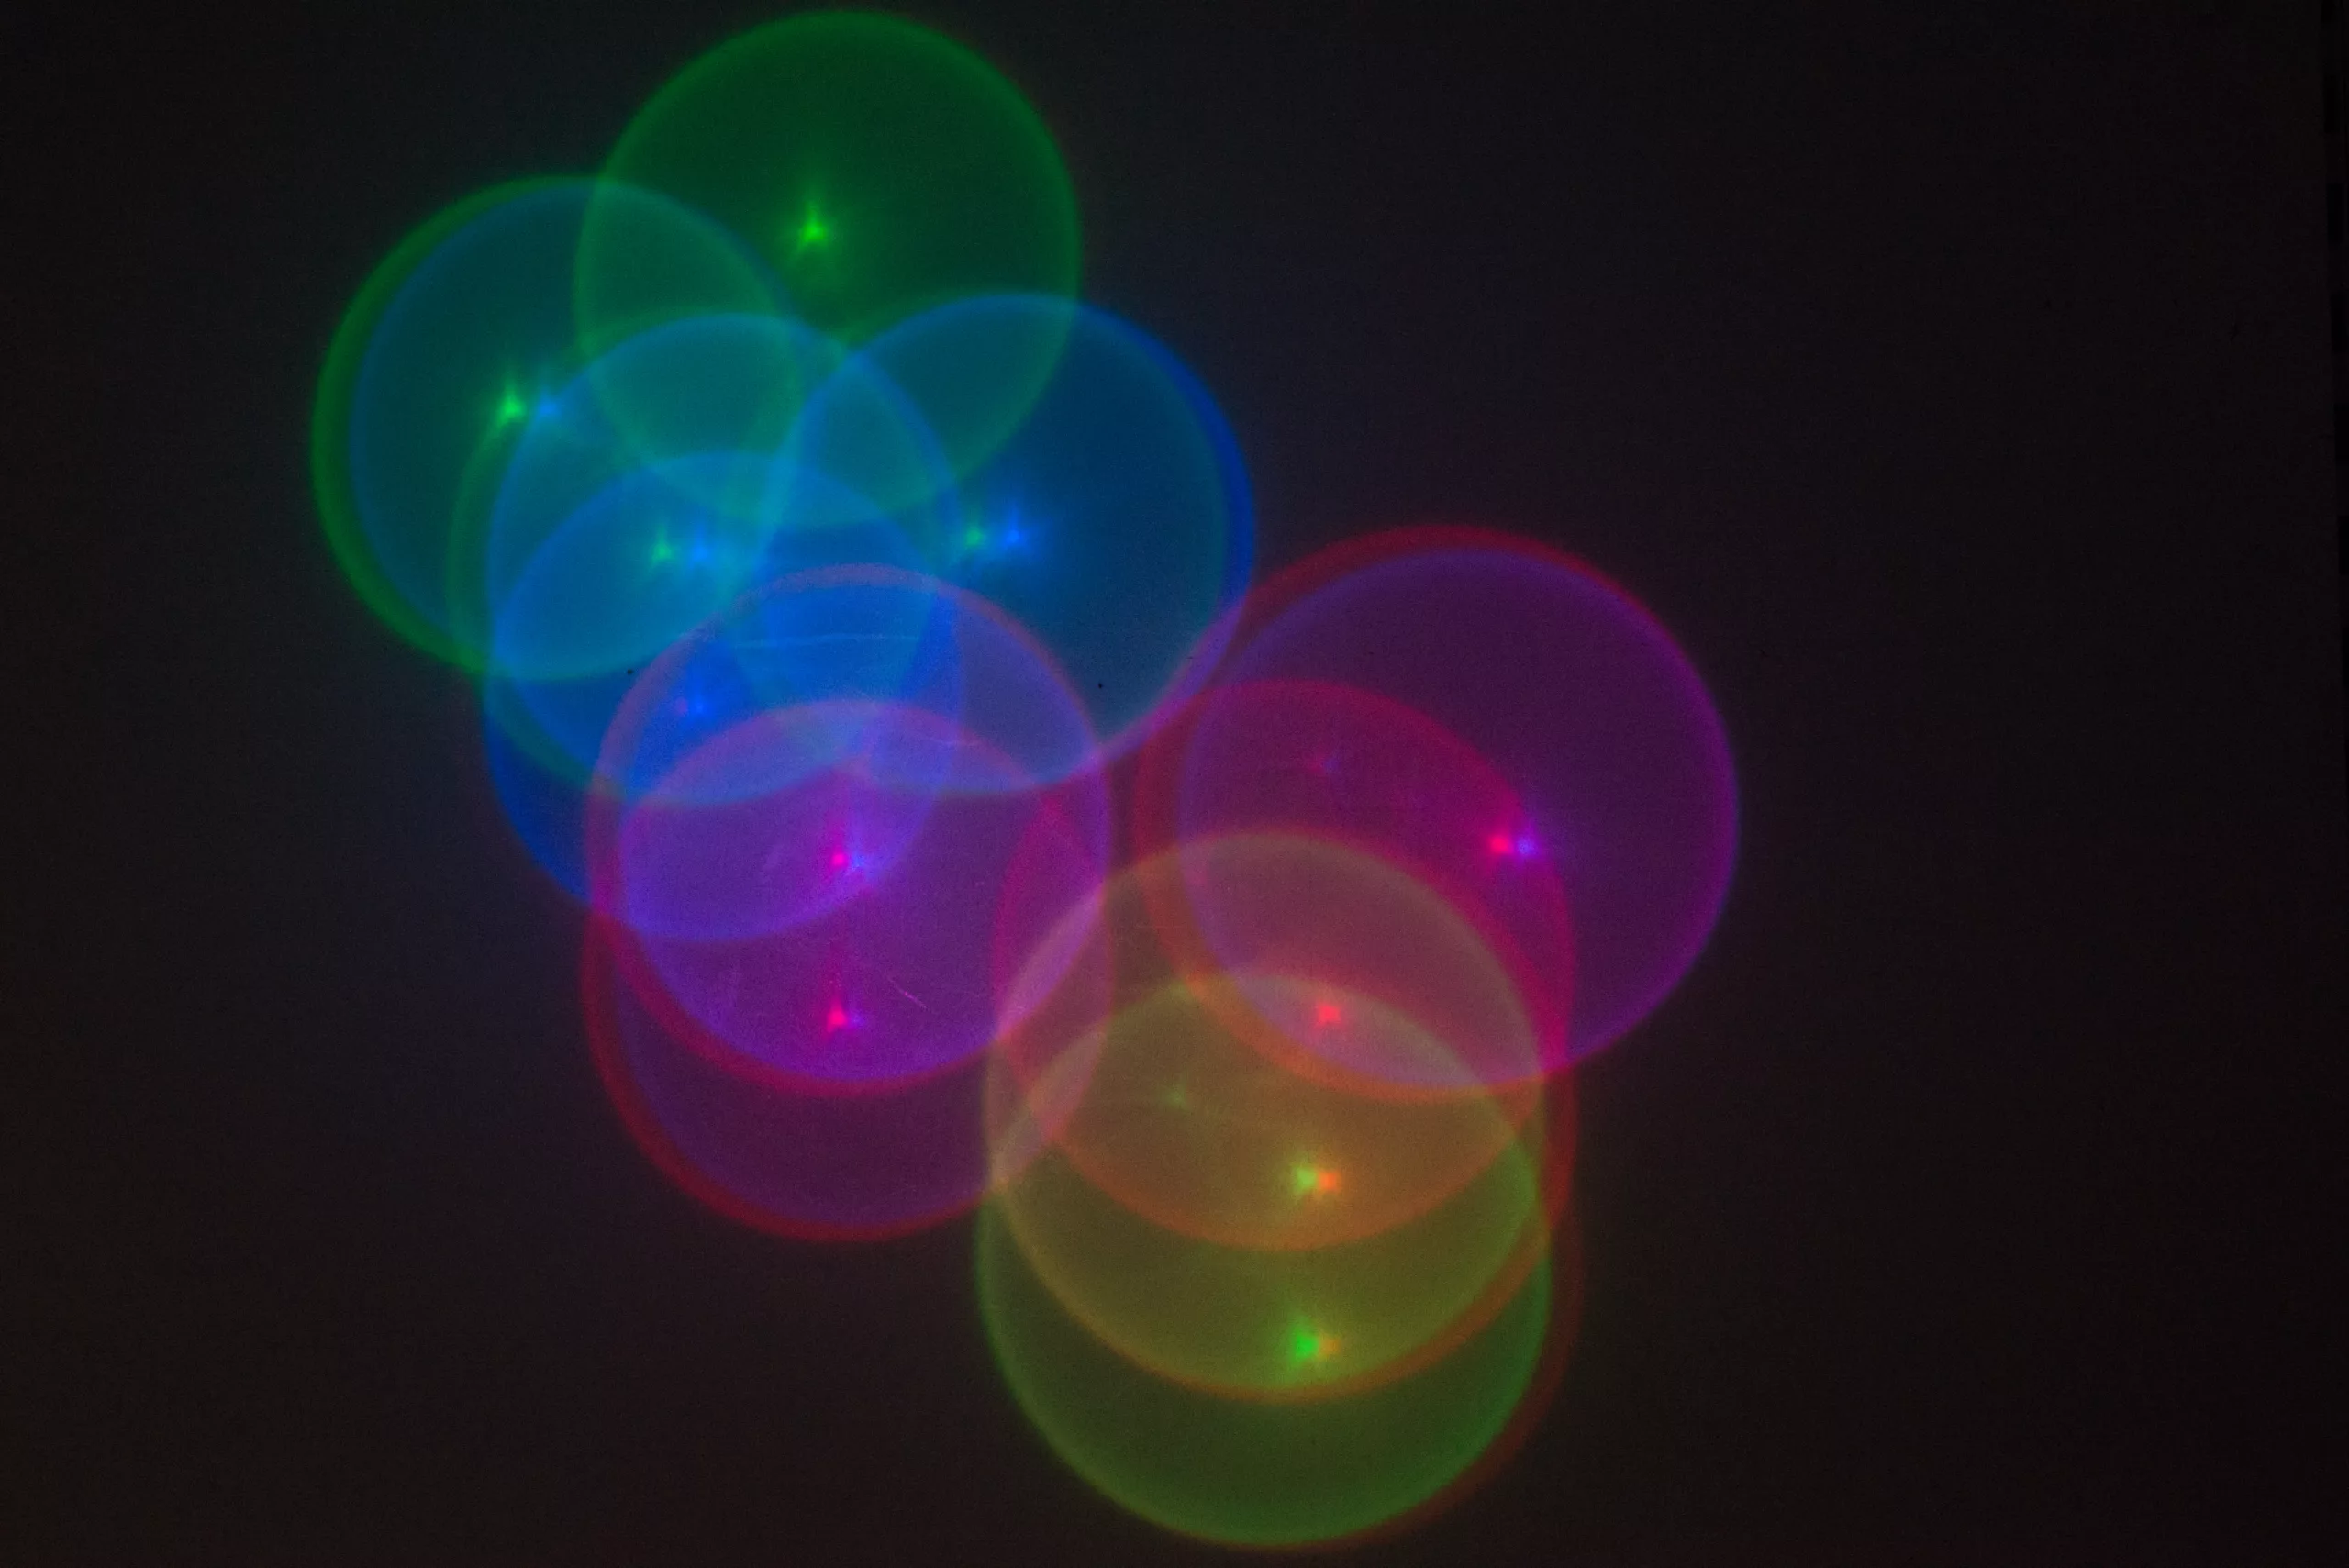 Multicolored, overlapping circles are projected onto a dark background.